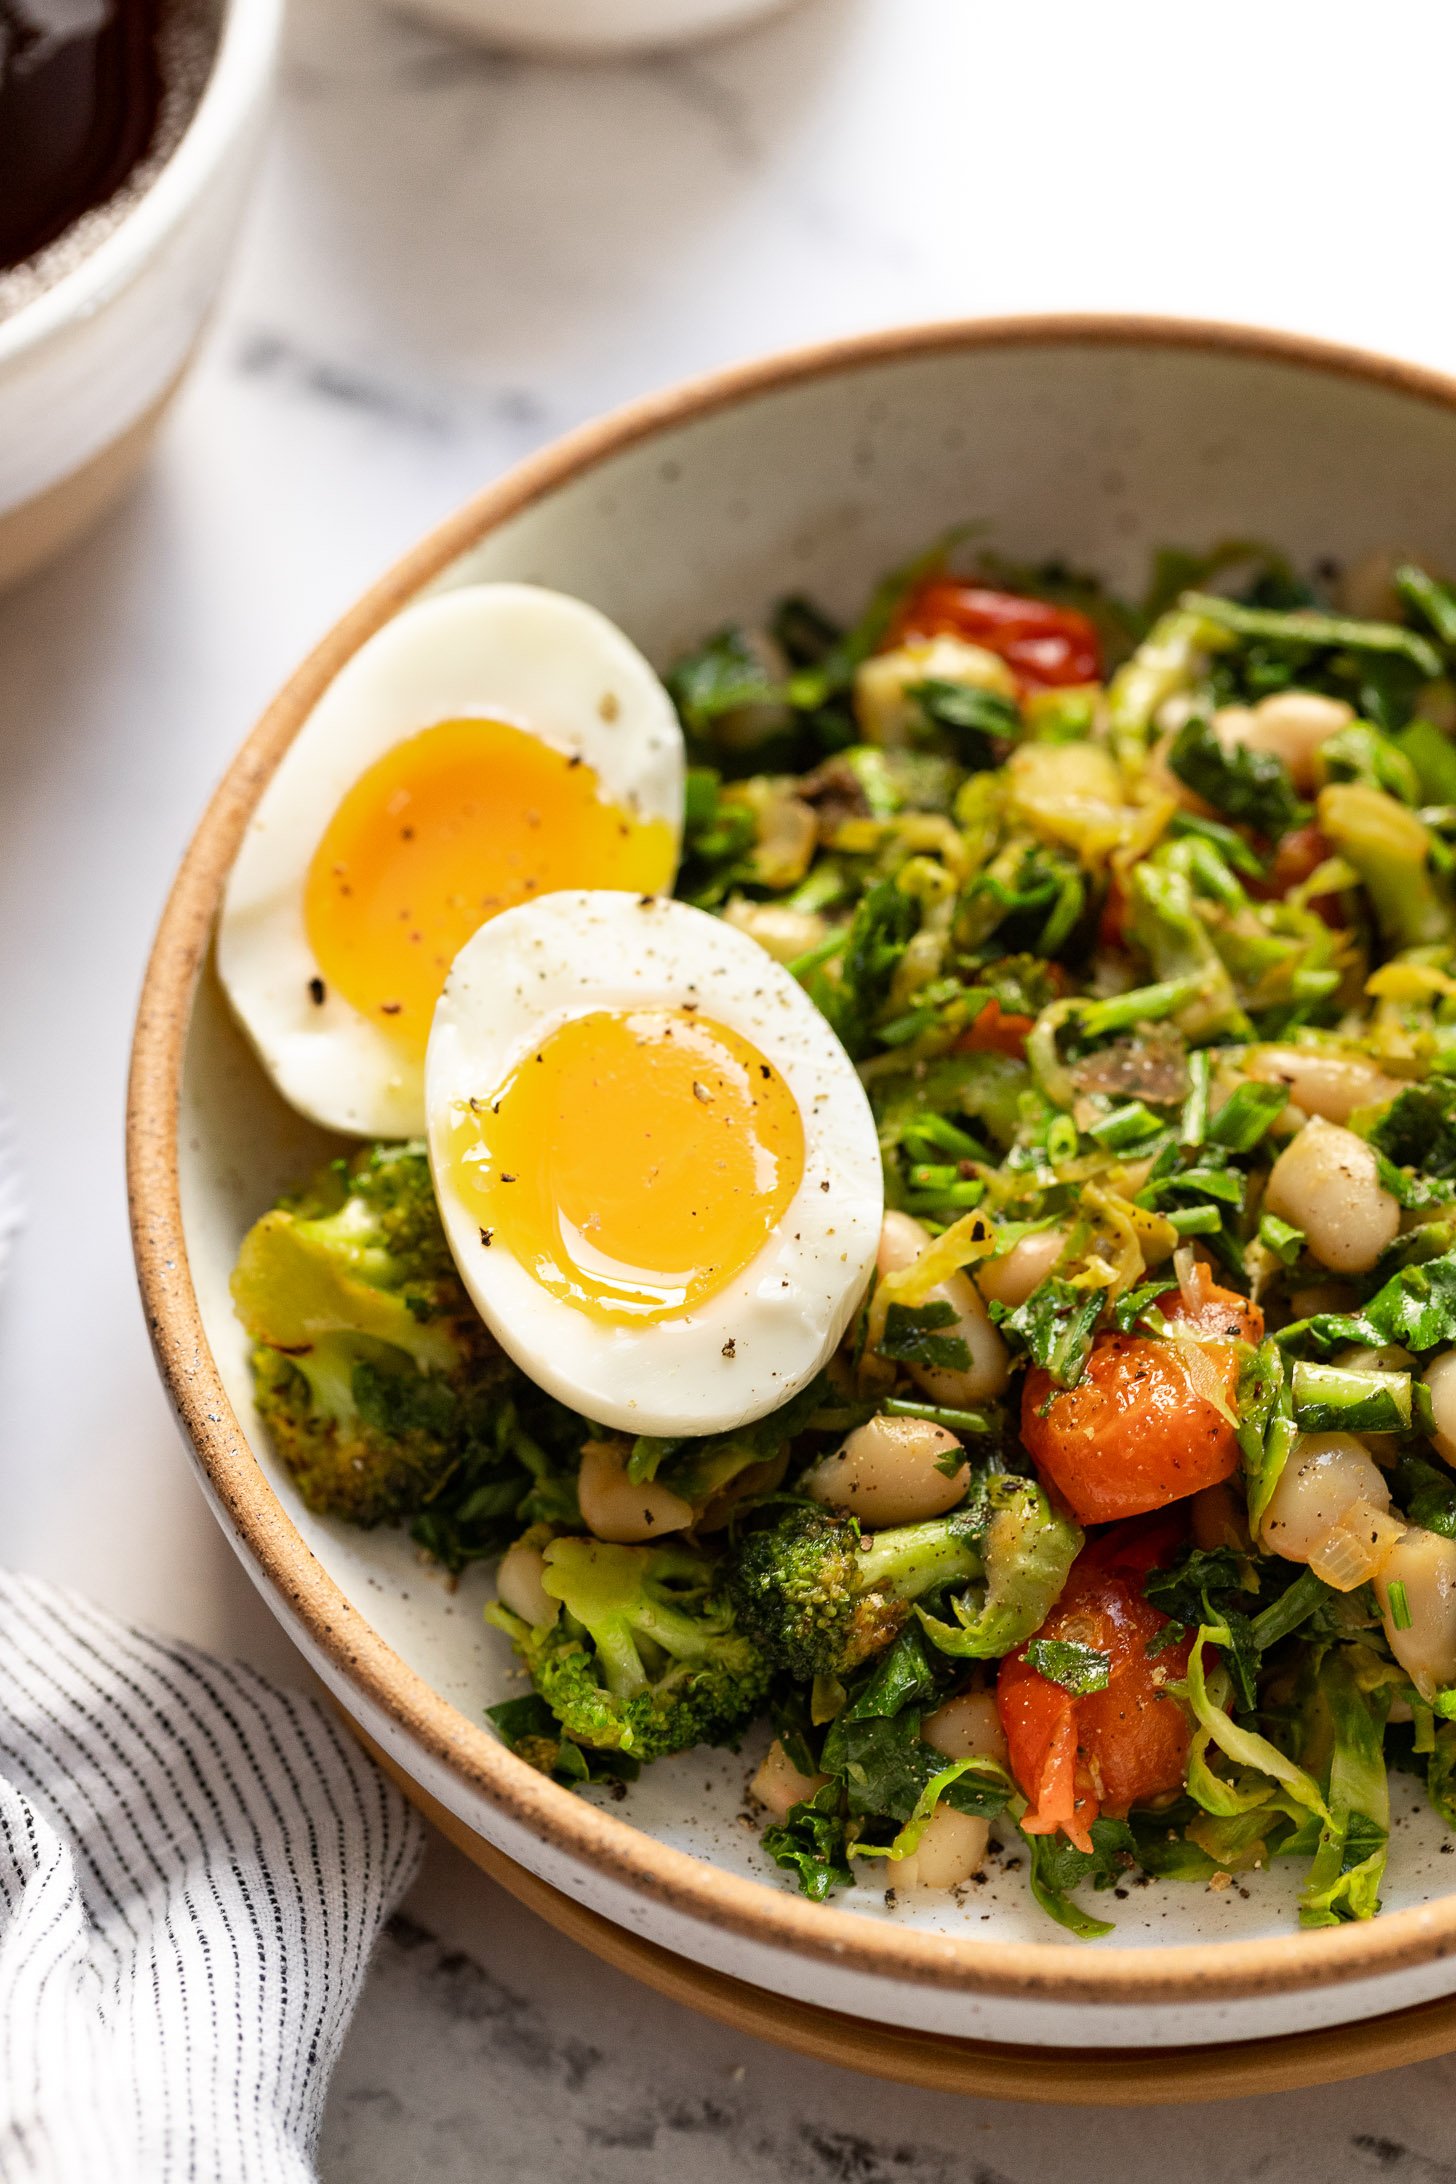 Soft boiled eggs on top of bowl of breakfast vegetables.